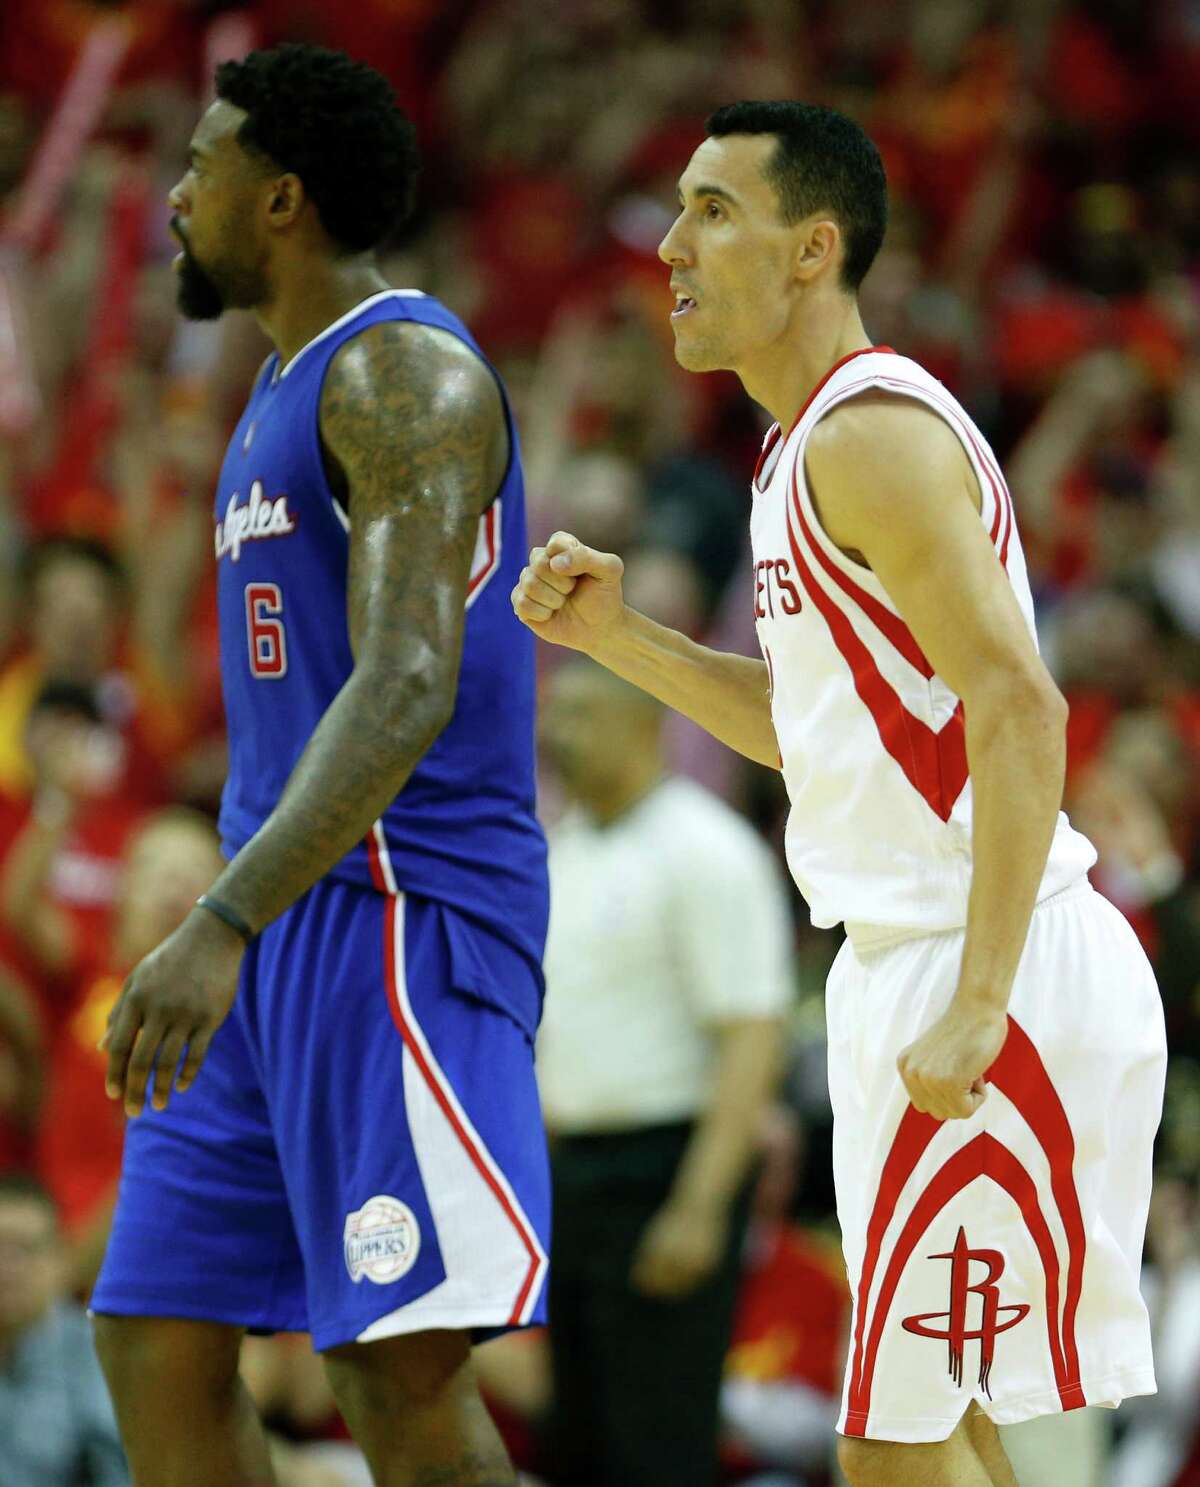 Pablo Prigioni celebrated his 38th birthday with four points, four assists and three key steals, helping the Rockets win Game 7 against the Clippers and advance to the Western Conference finals.